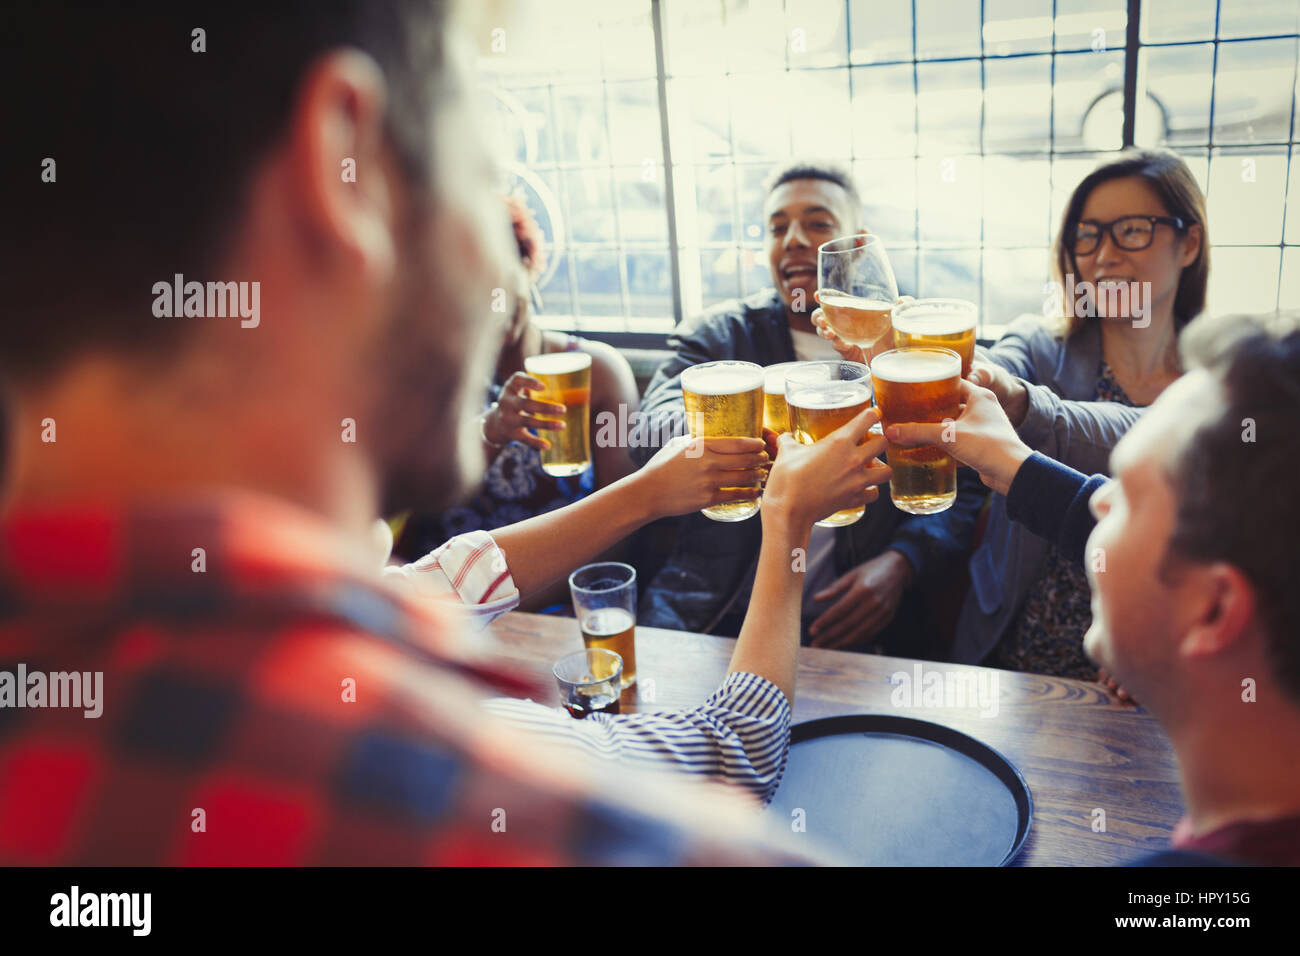 Friends celebrating, toasting beer glass at bar table Stock Photo